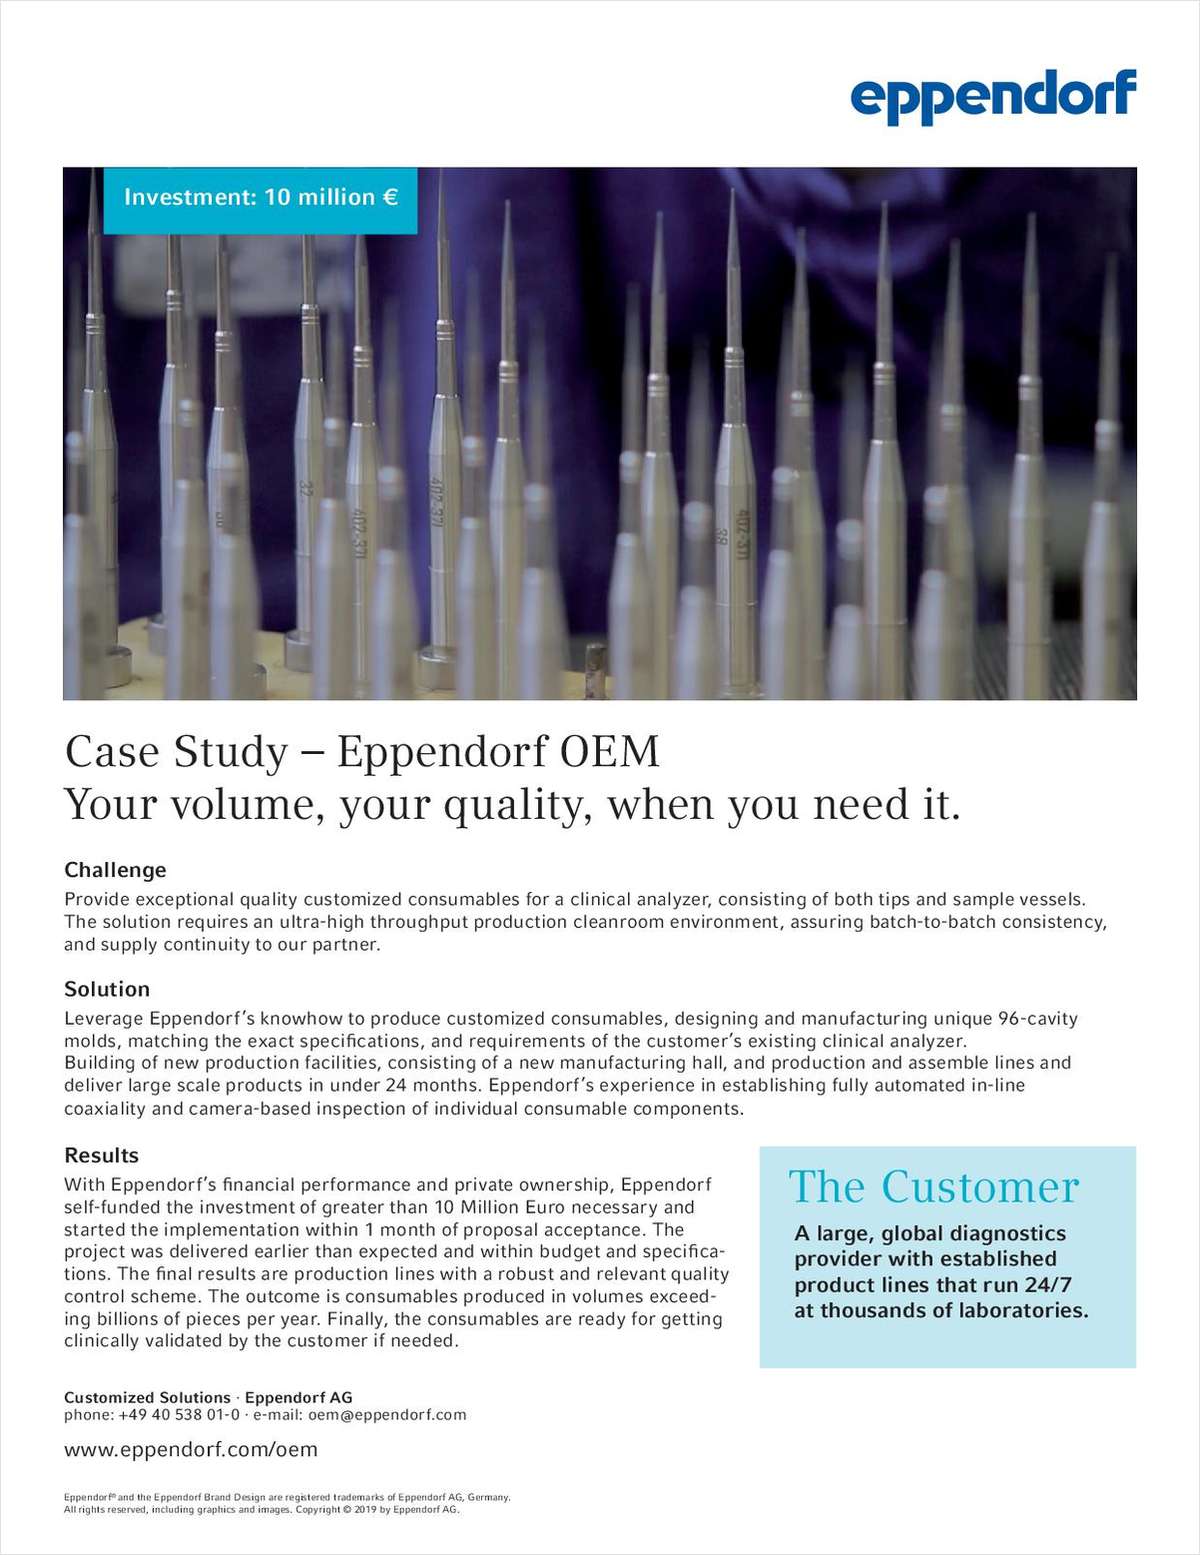 Case Study: Eppendorf OEM for a Clinical Analyzer